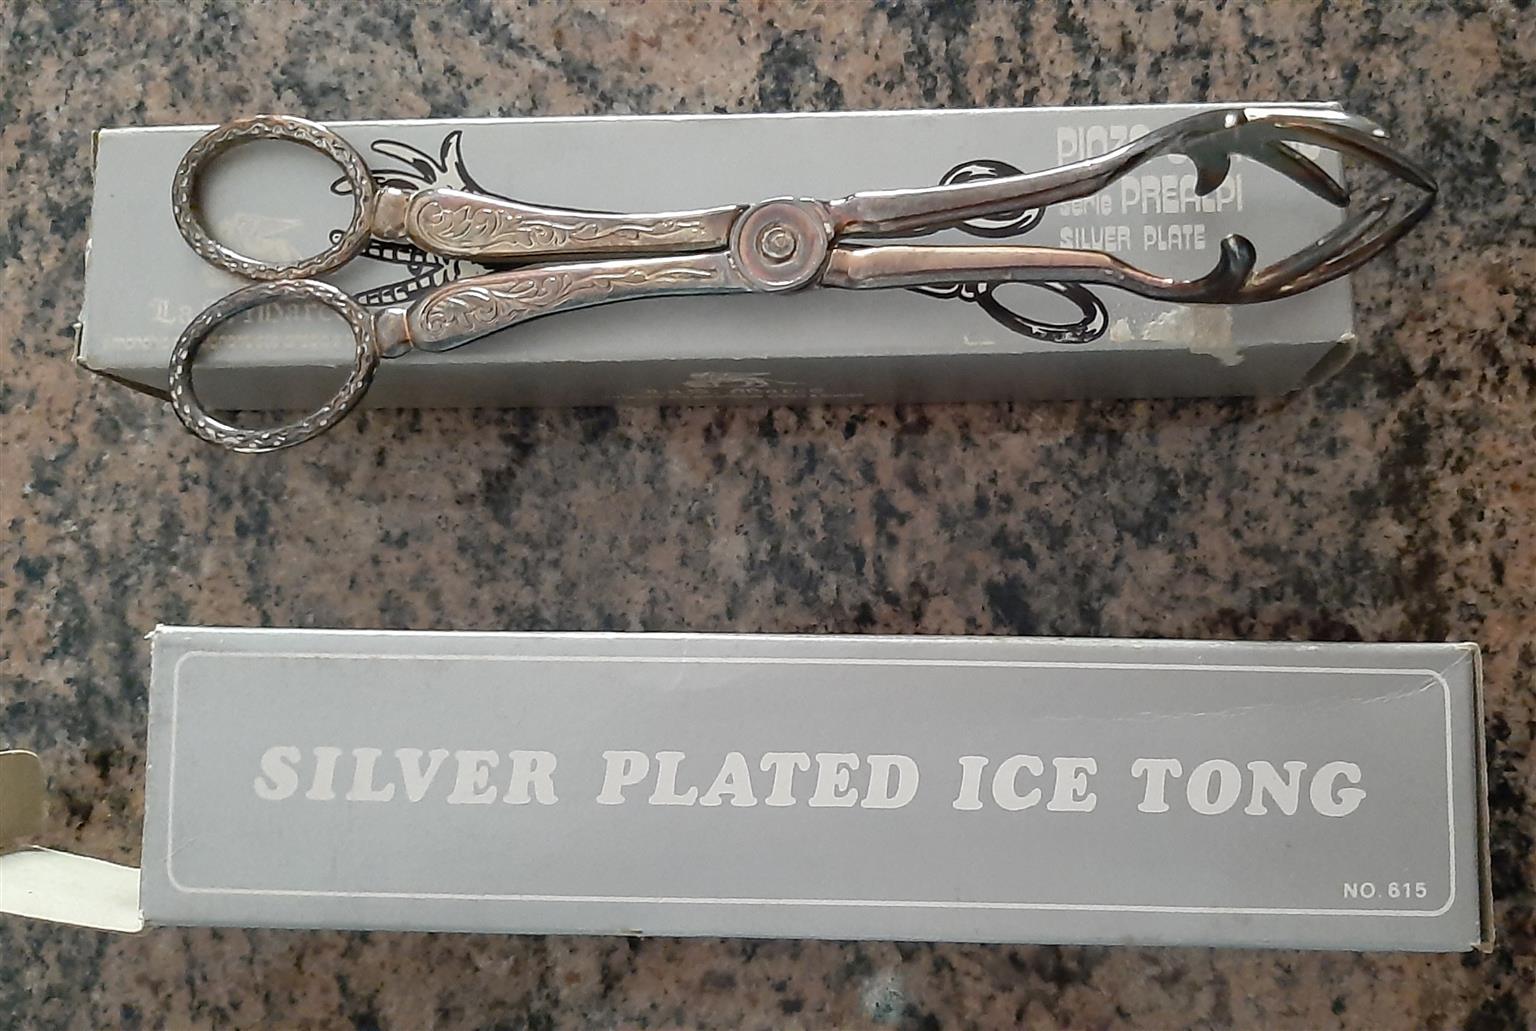 TWO SILWER PLATED ICE TONGS